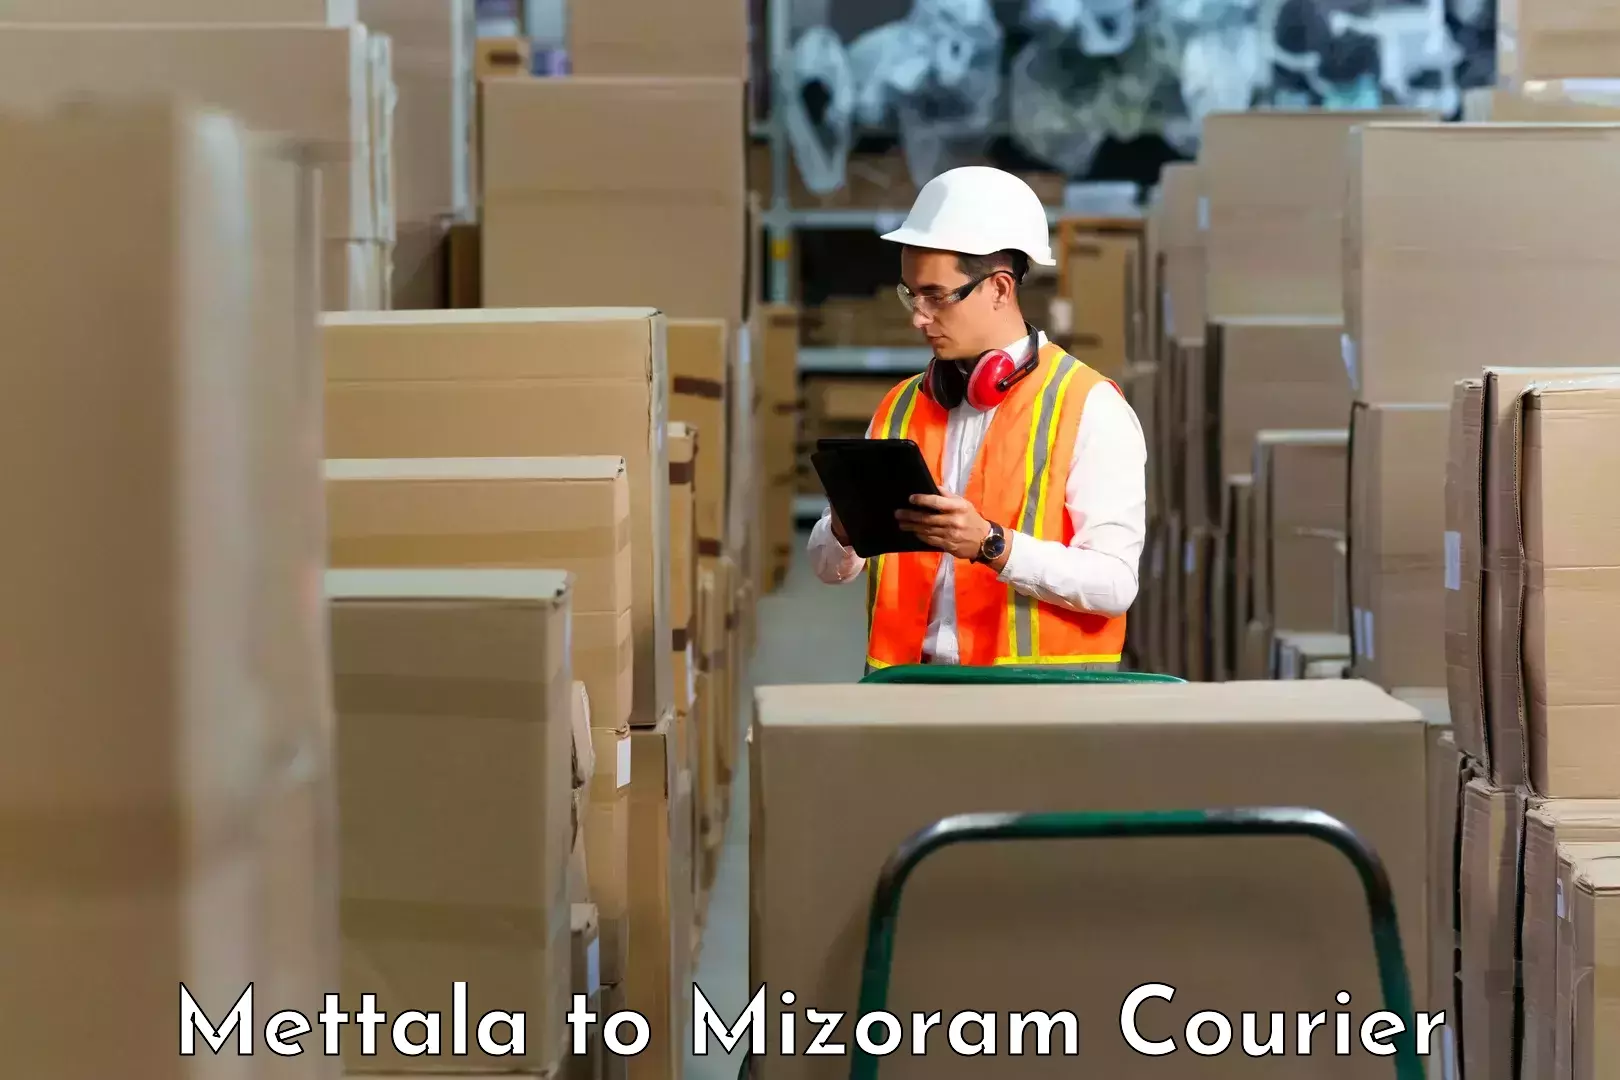 Flexible delivery schedules Mettala to Darlawn